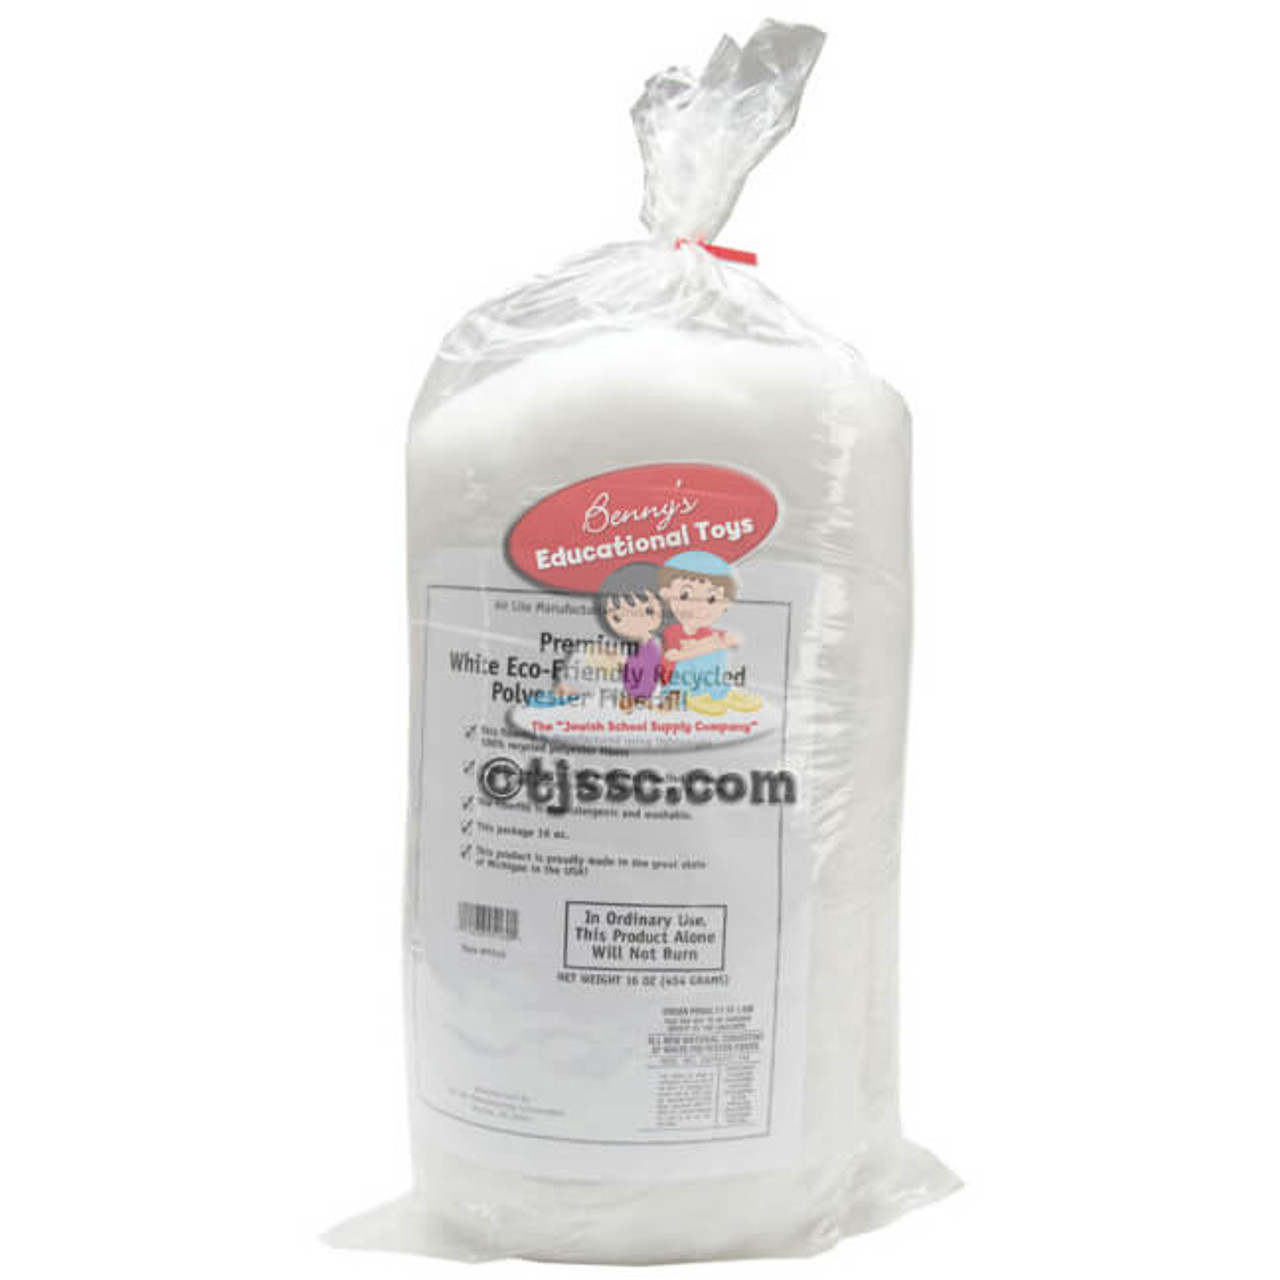 Sale! Polyester Fiber Fill for Re-Stuffing Pillows, Stuff Toys